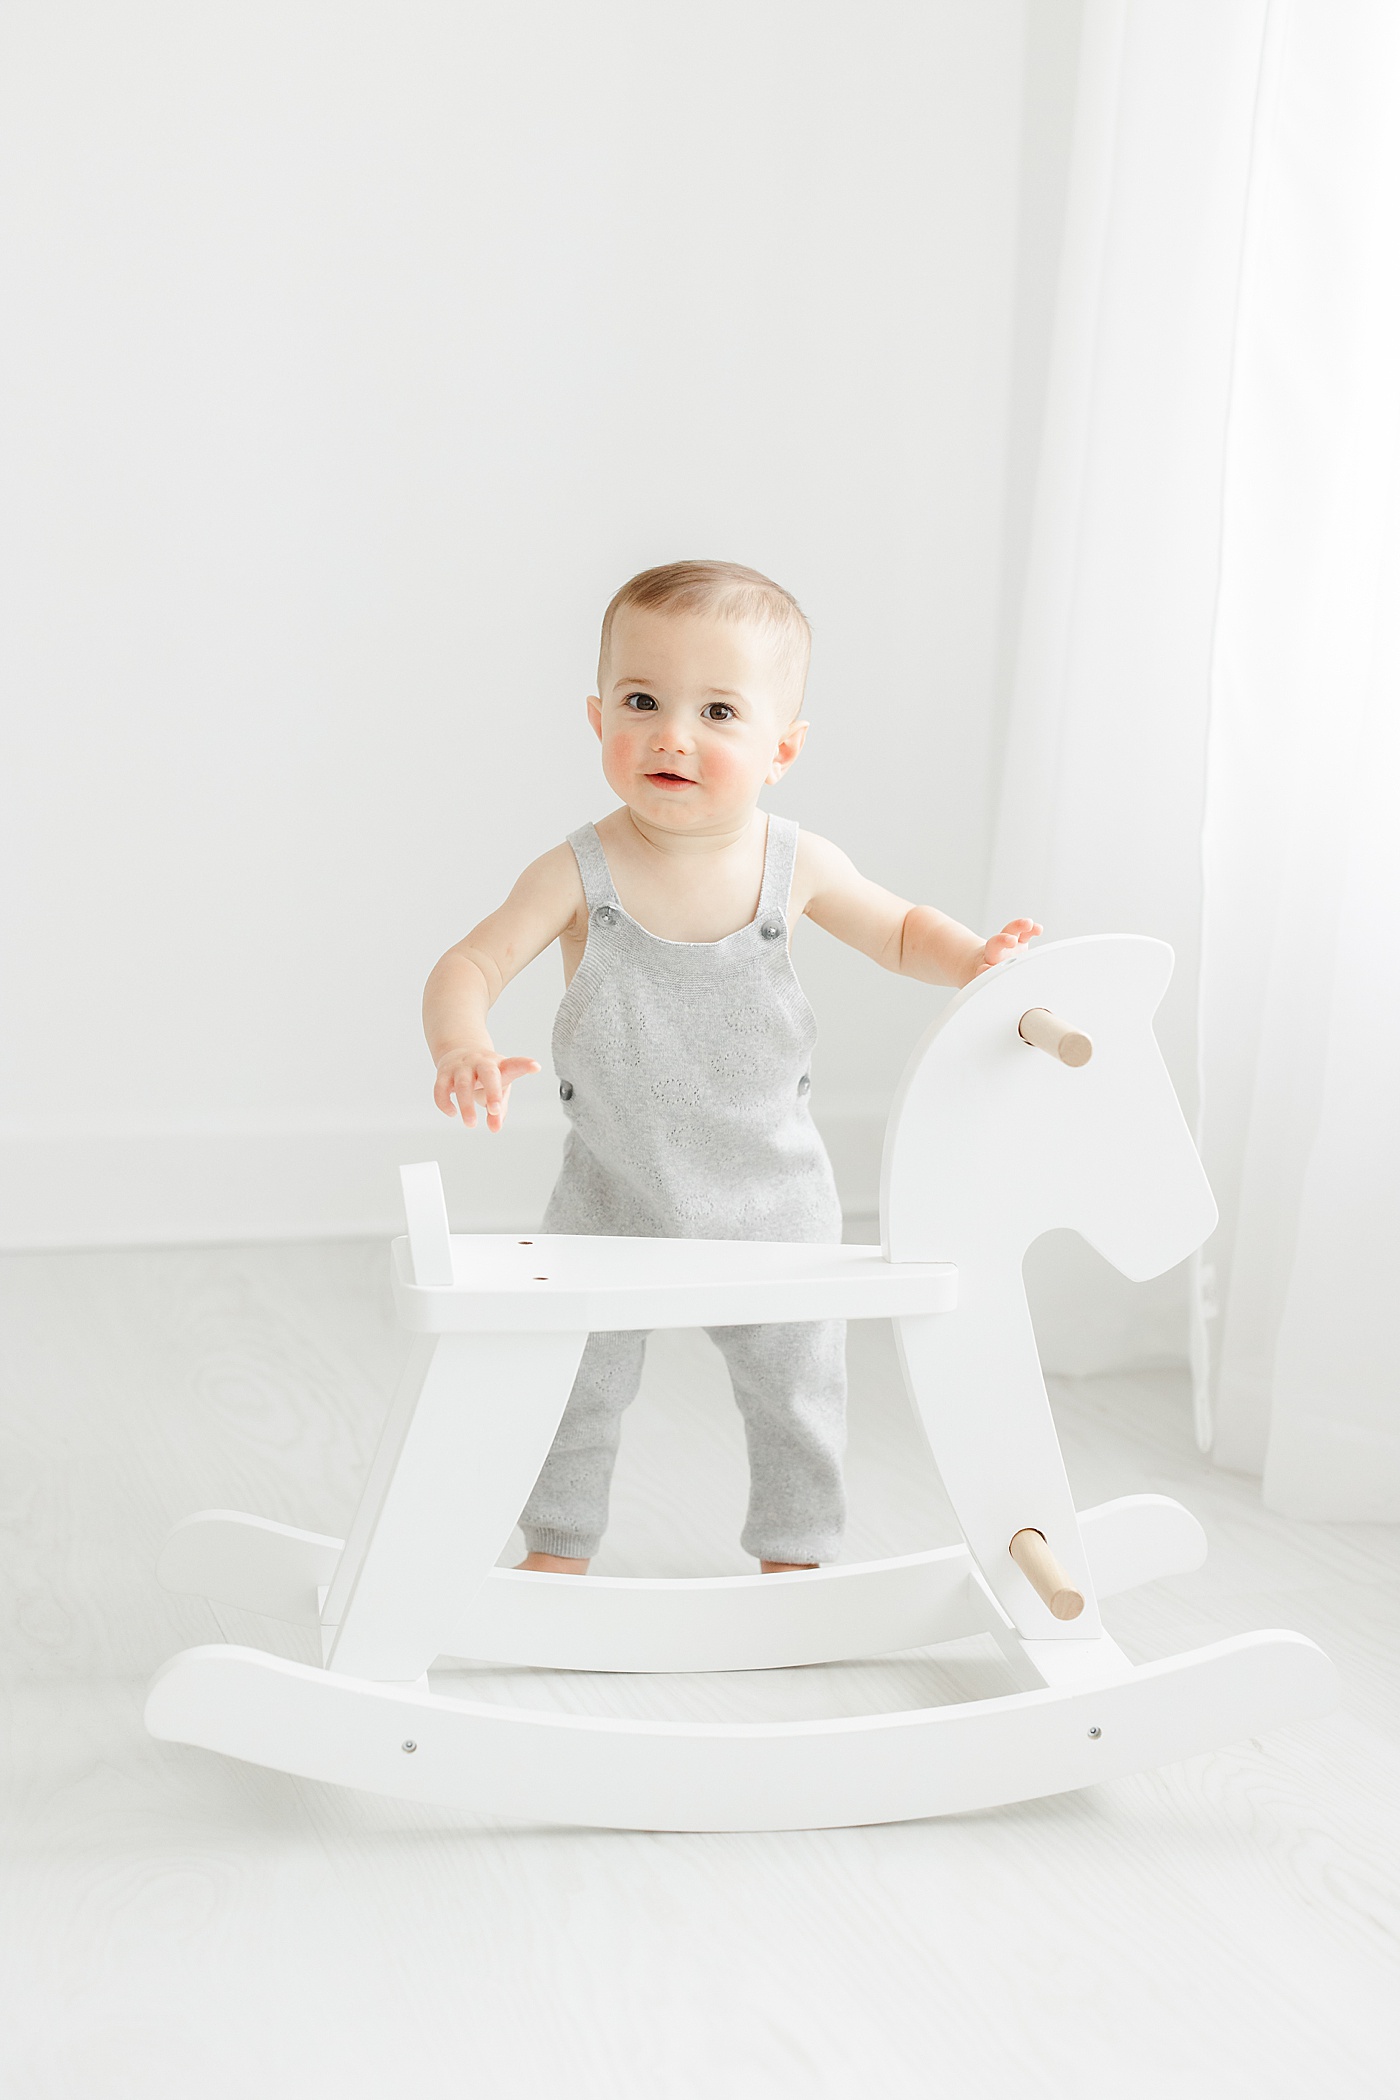 One year old boy standing with rocking horse during first birthday photoshoot with Kristin Wood Photography.